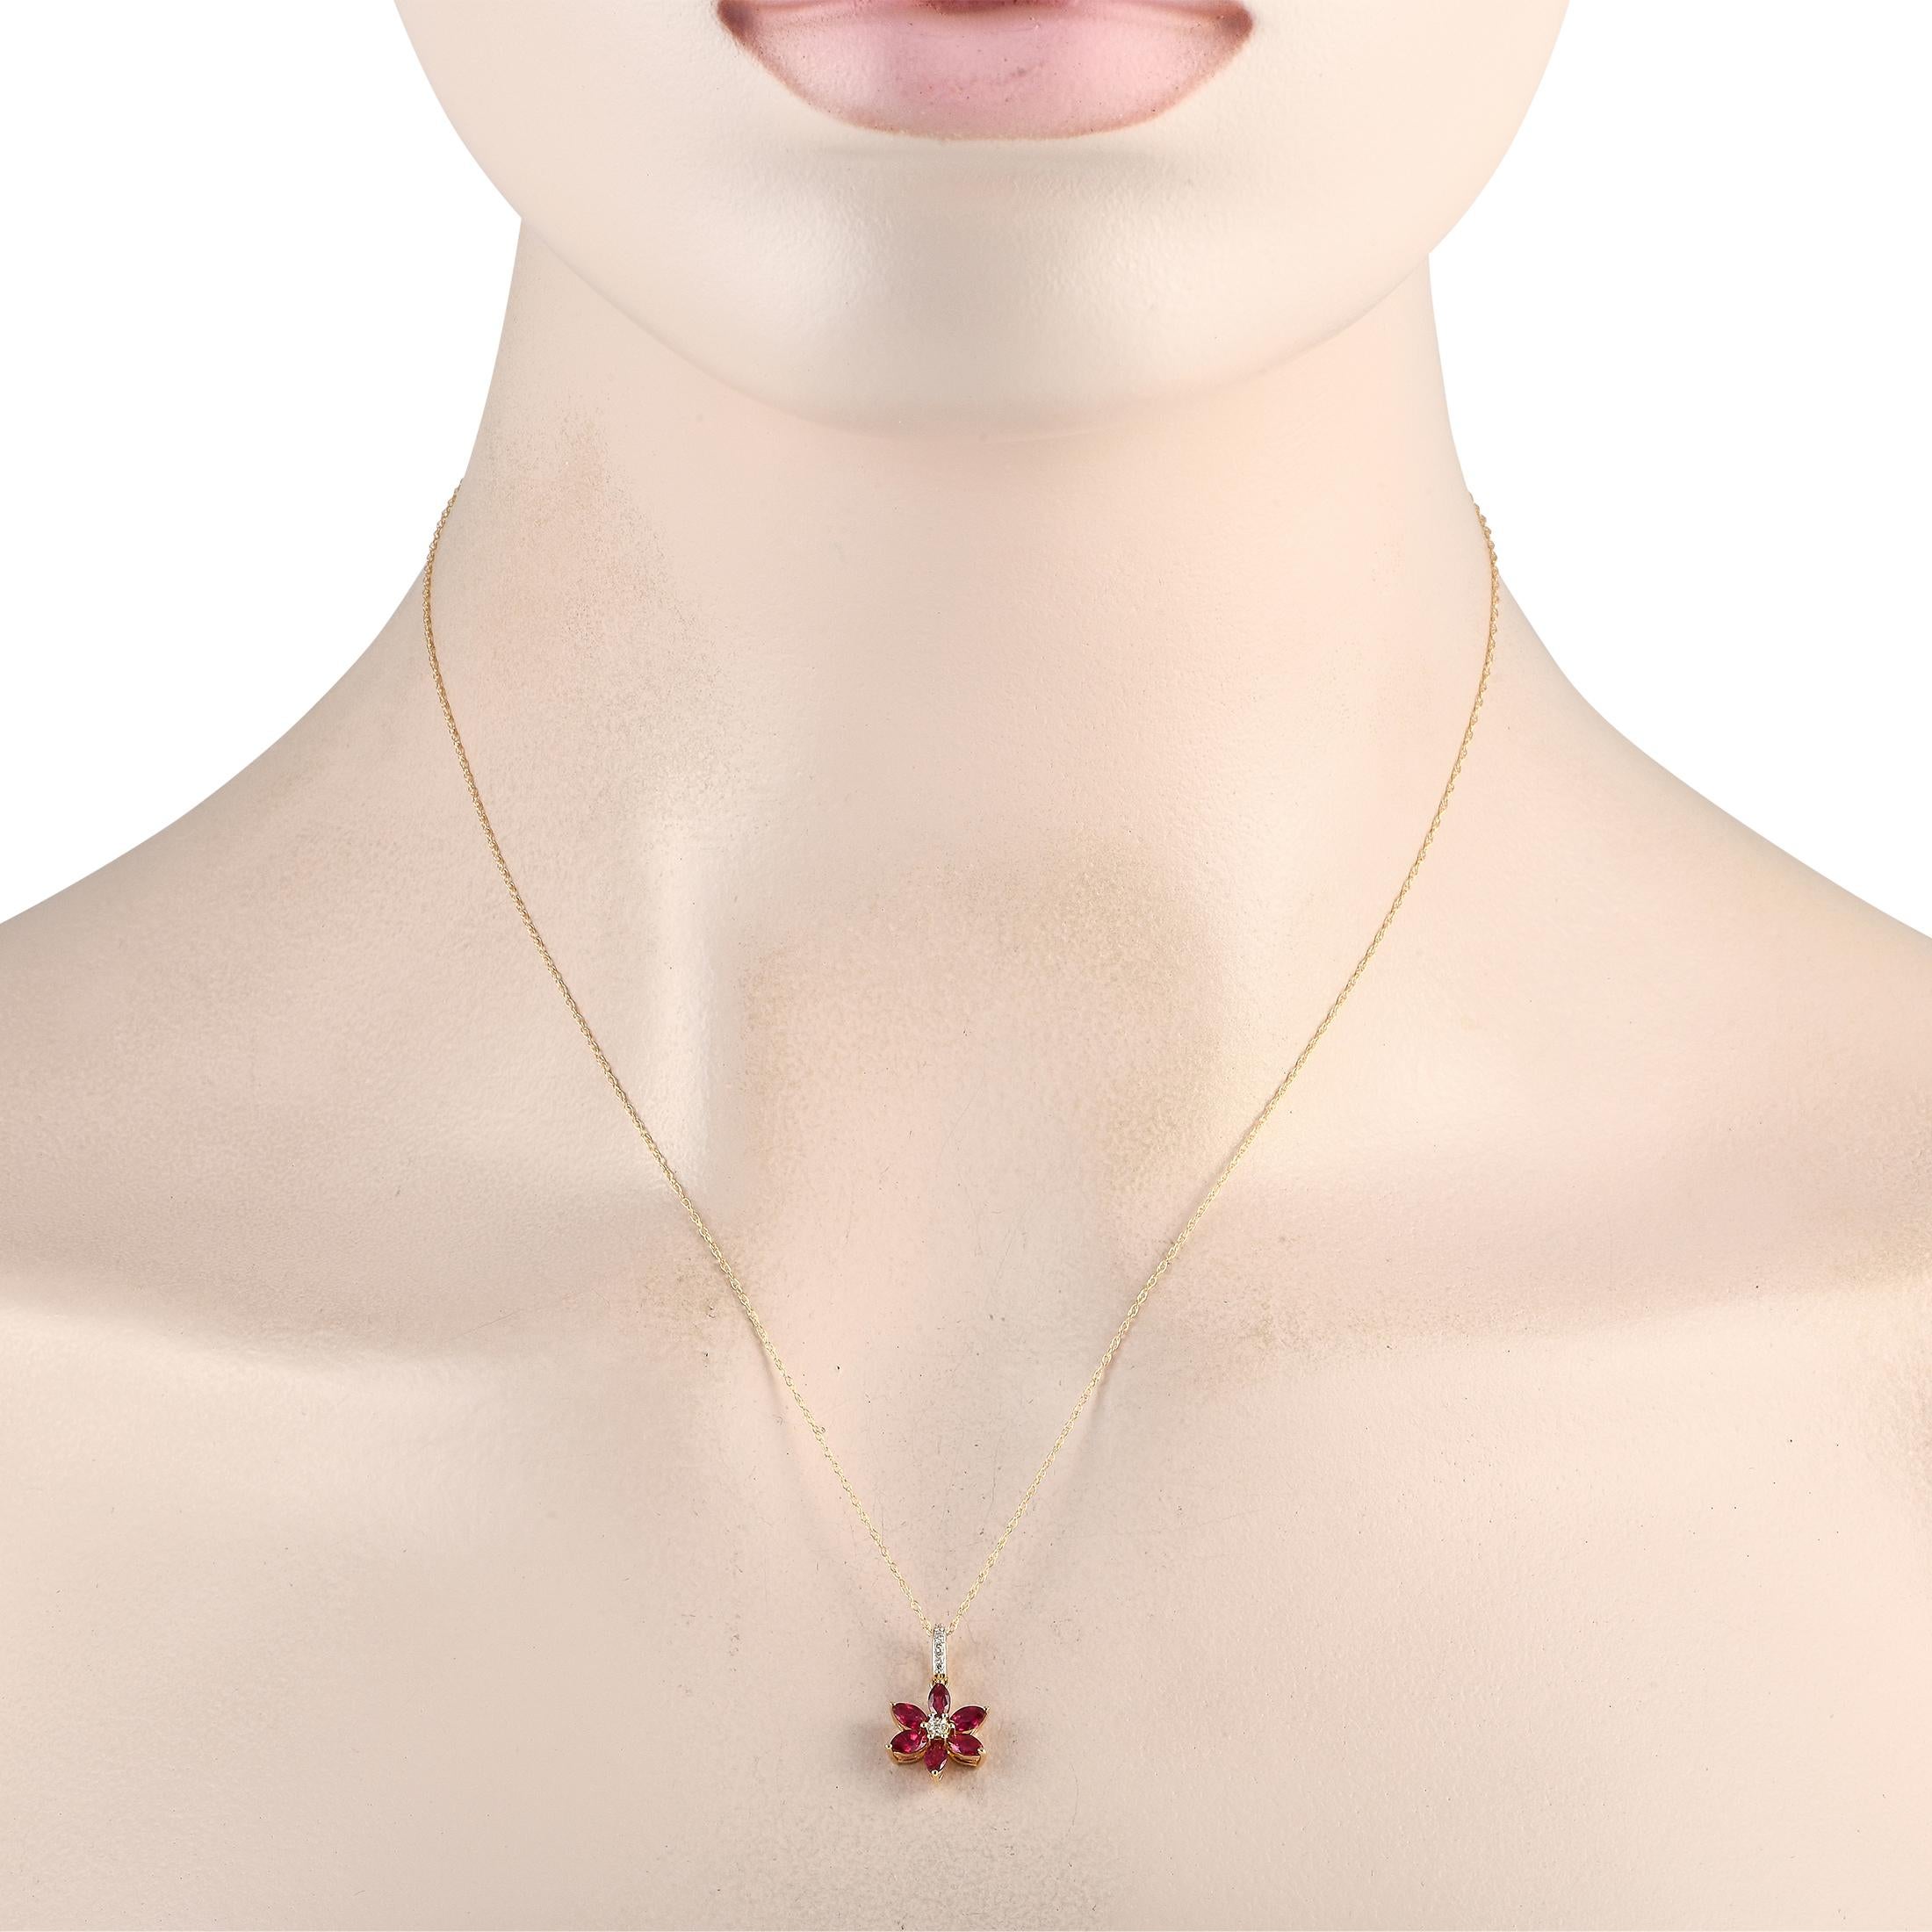 Bring any ensemble to life with this luxurious 14K Yellow Gold necklace. On this exquisite accessory, the floral-shaped pendant features radiant Ruby petals and Diamonds with a total weight of 0.01 carats. The pendant measures 0.75 long by 0.50 wide